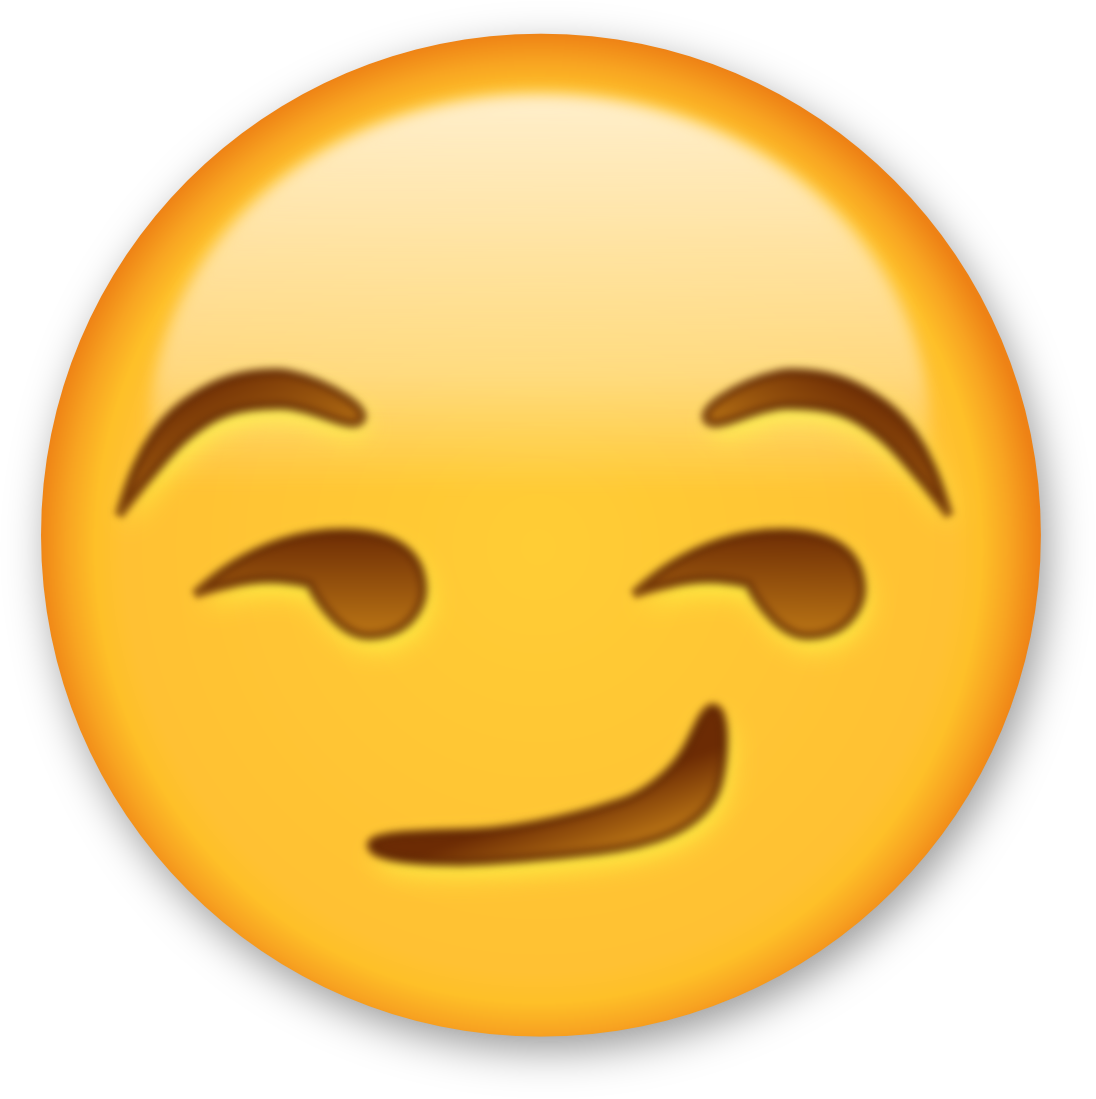 A Yellow Emoji With A Black Background